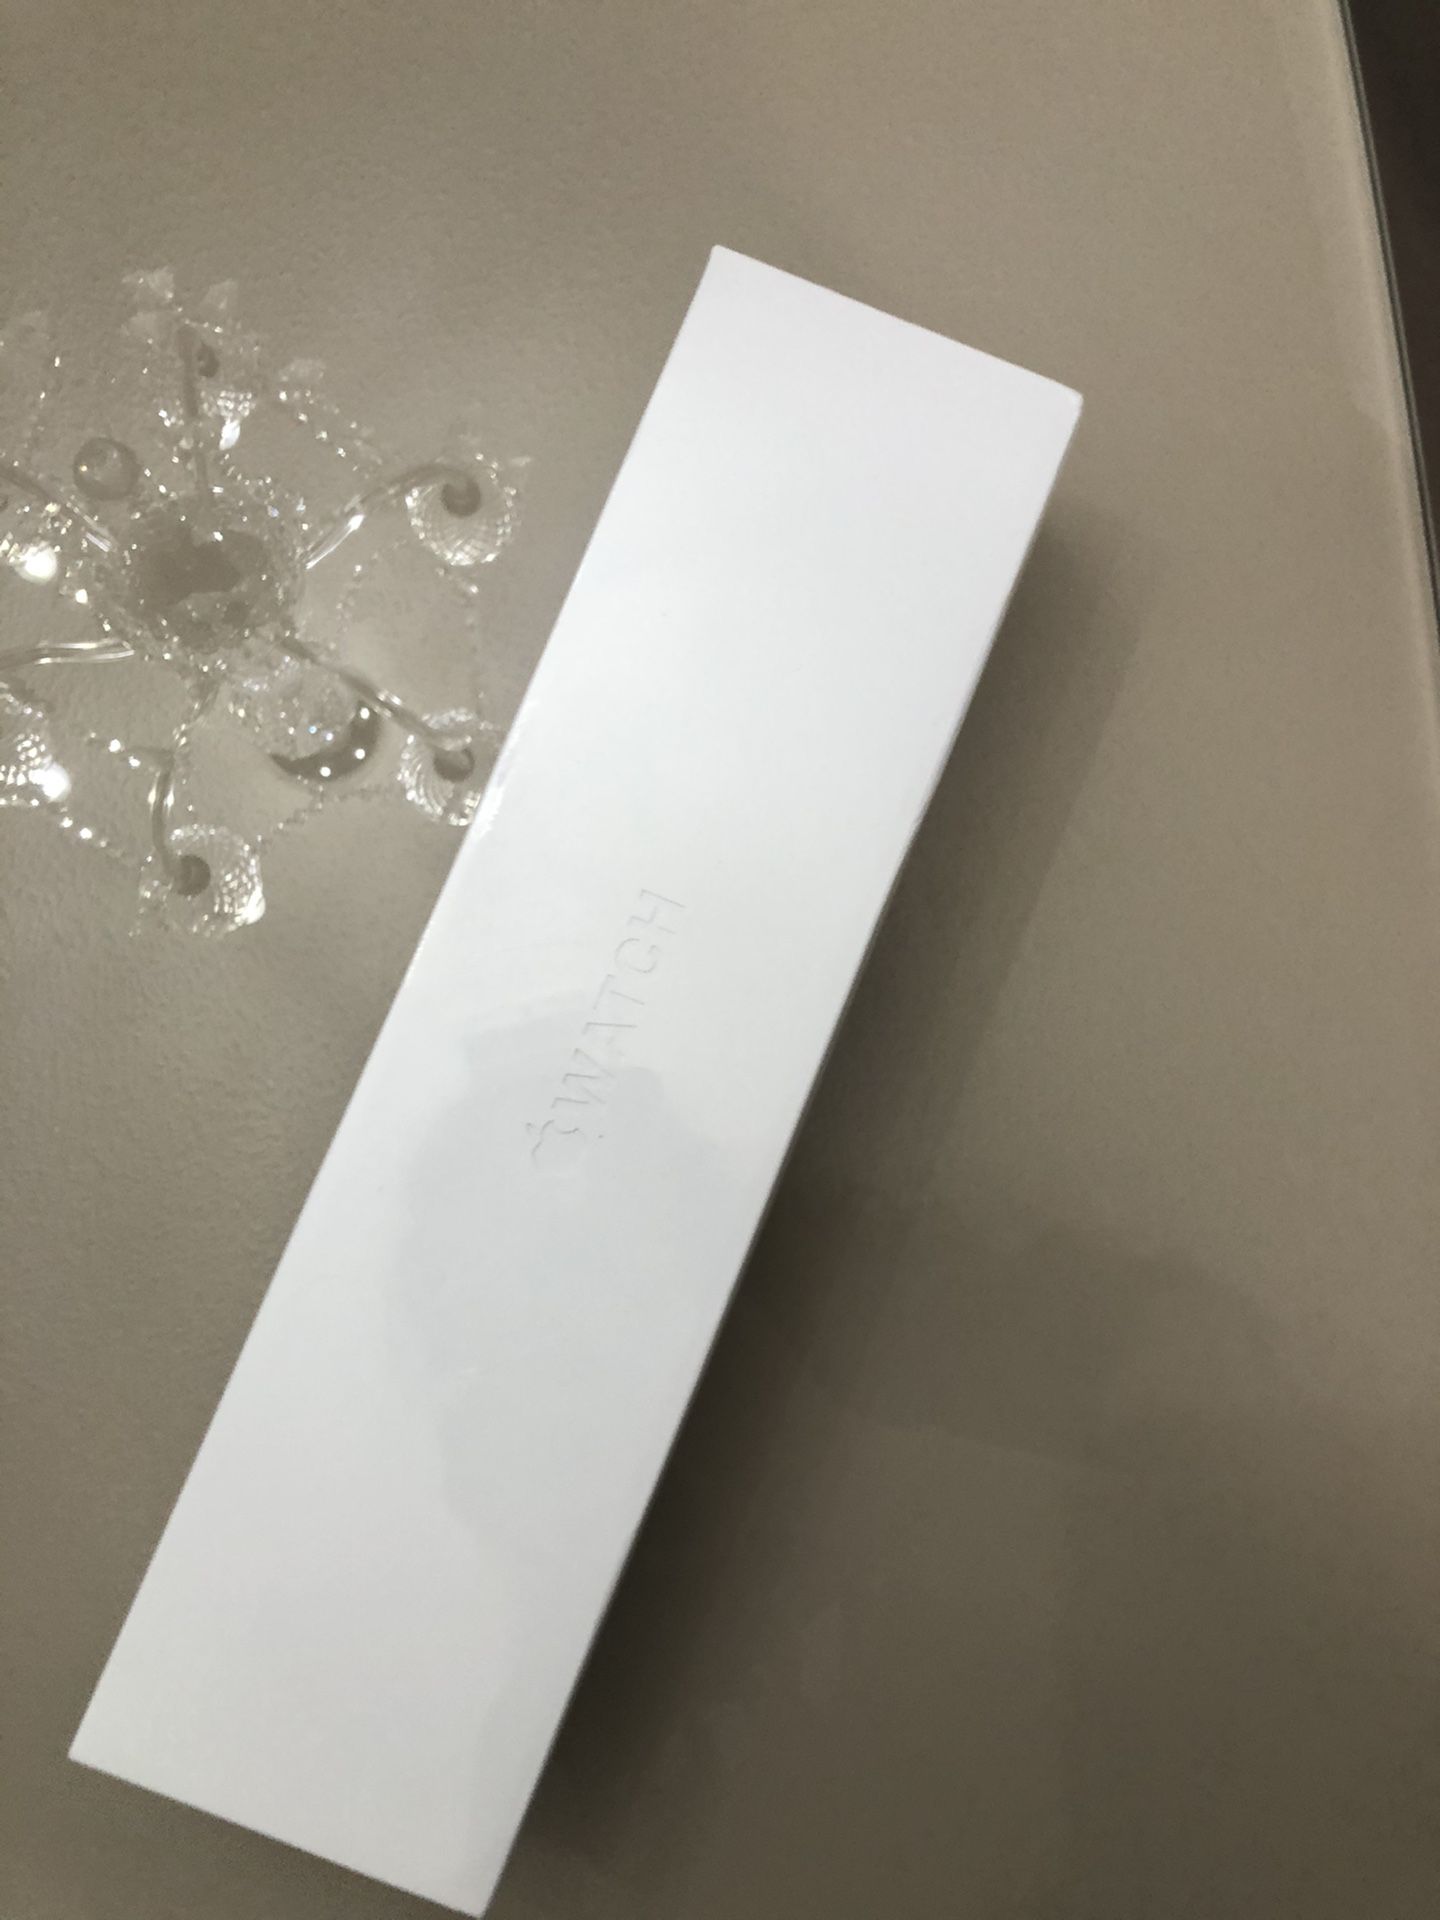 Apple Watch Series 5, 40MM Silver Aluminum Case with Sport Band.